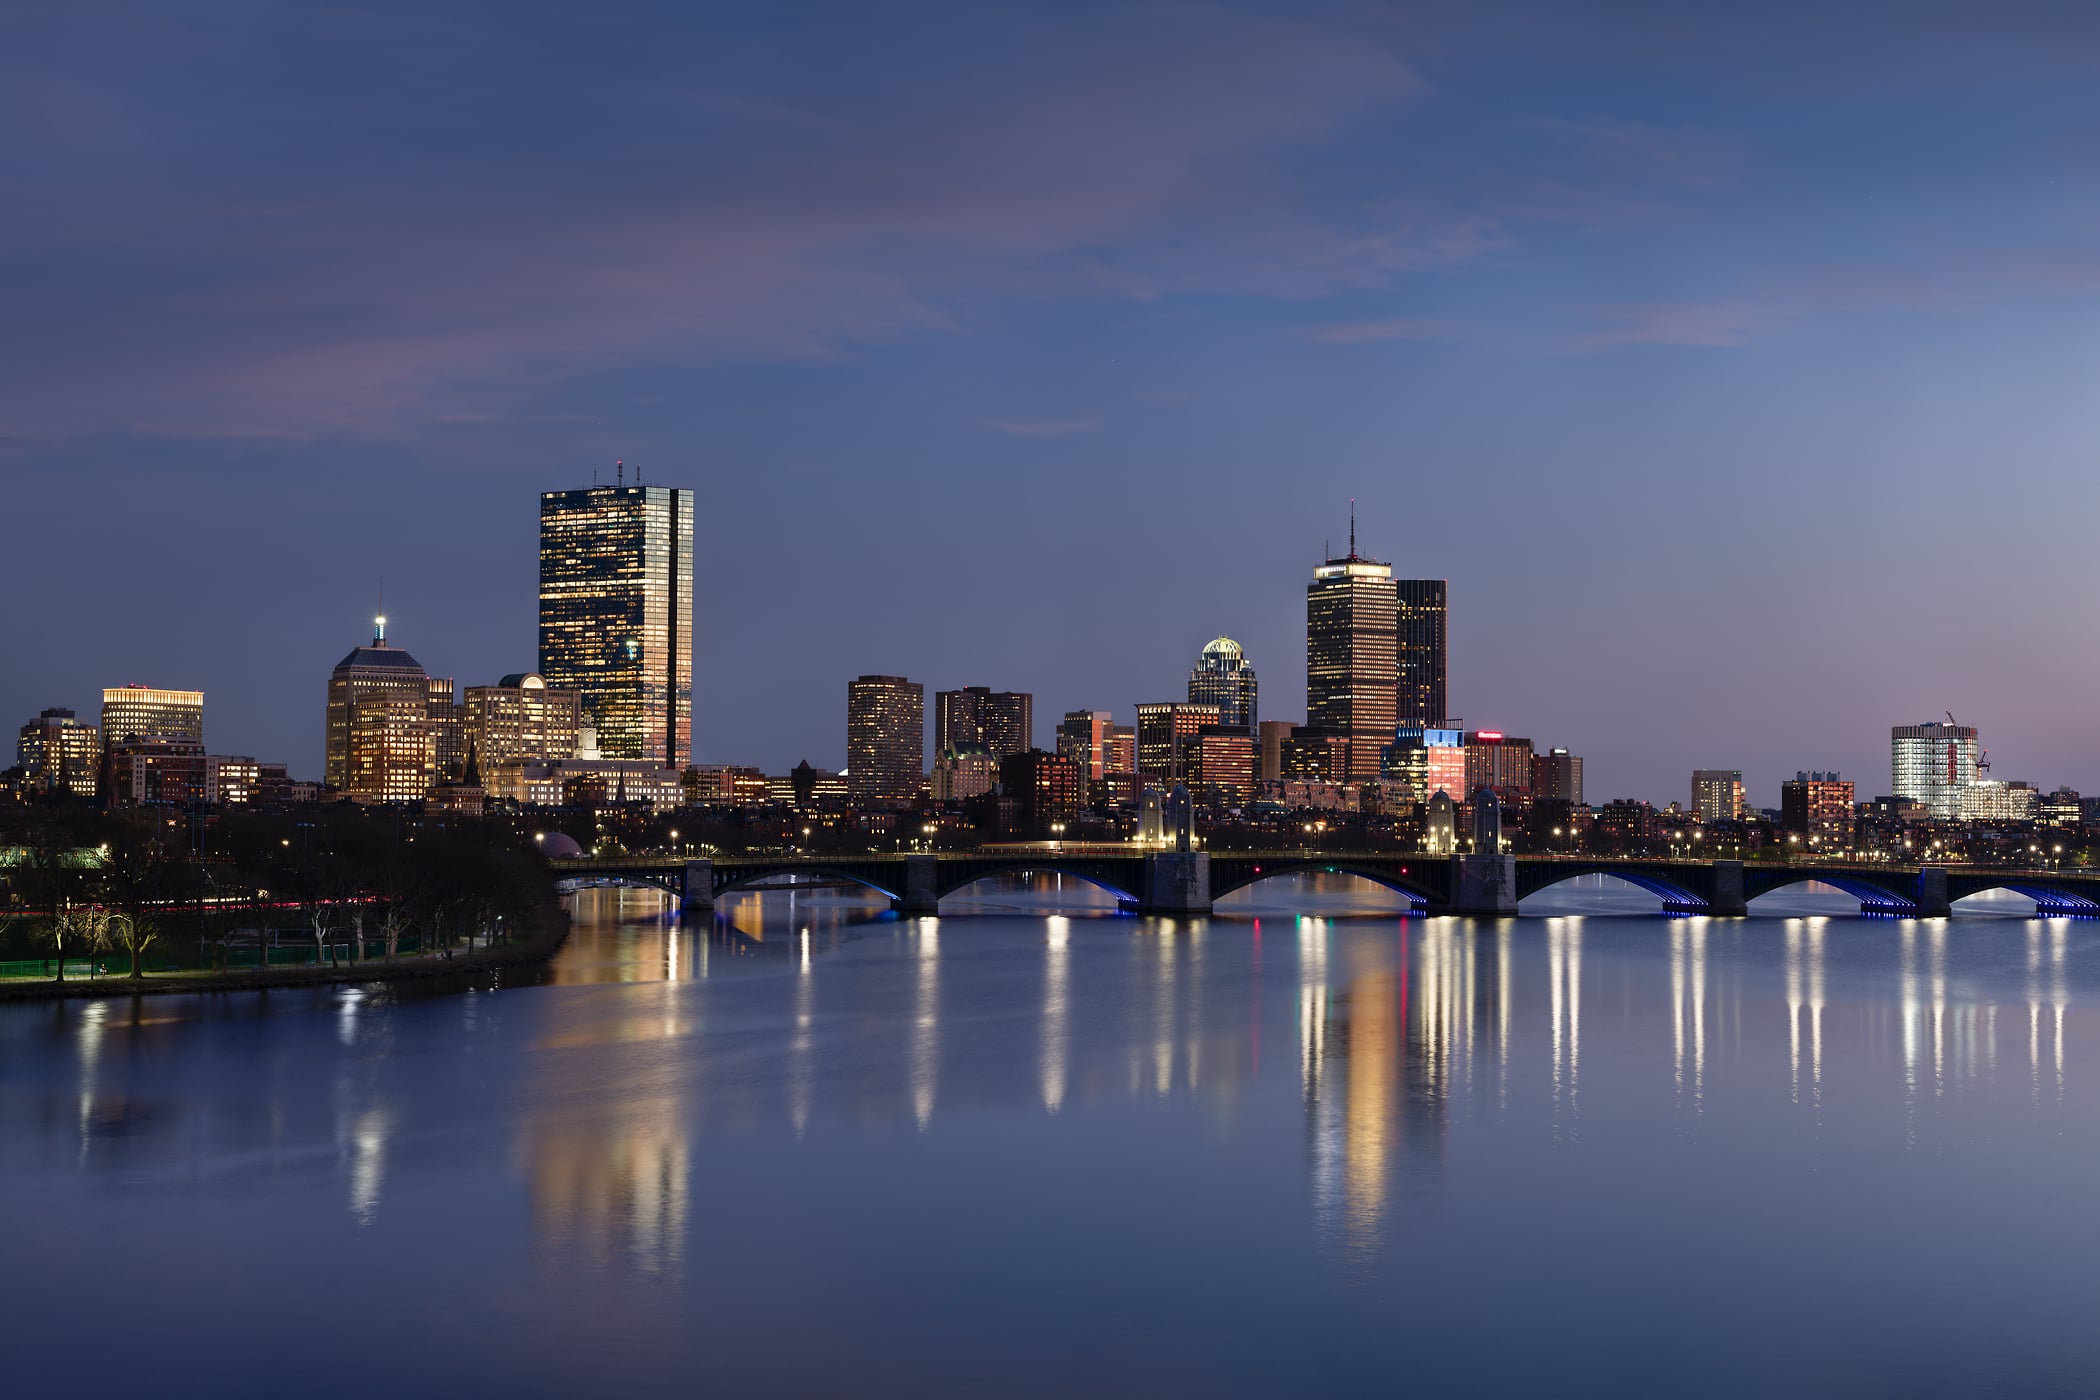 287 megapixels! A very high resolution, large-format VAST photo print of the Boston skyline at dusk along the Charles River; cityscape photograph created by Greg Probst in Boston, Massachusetts.